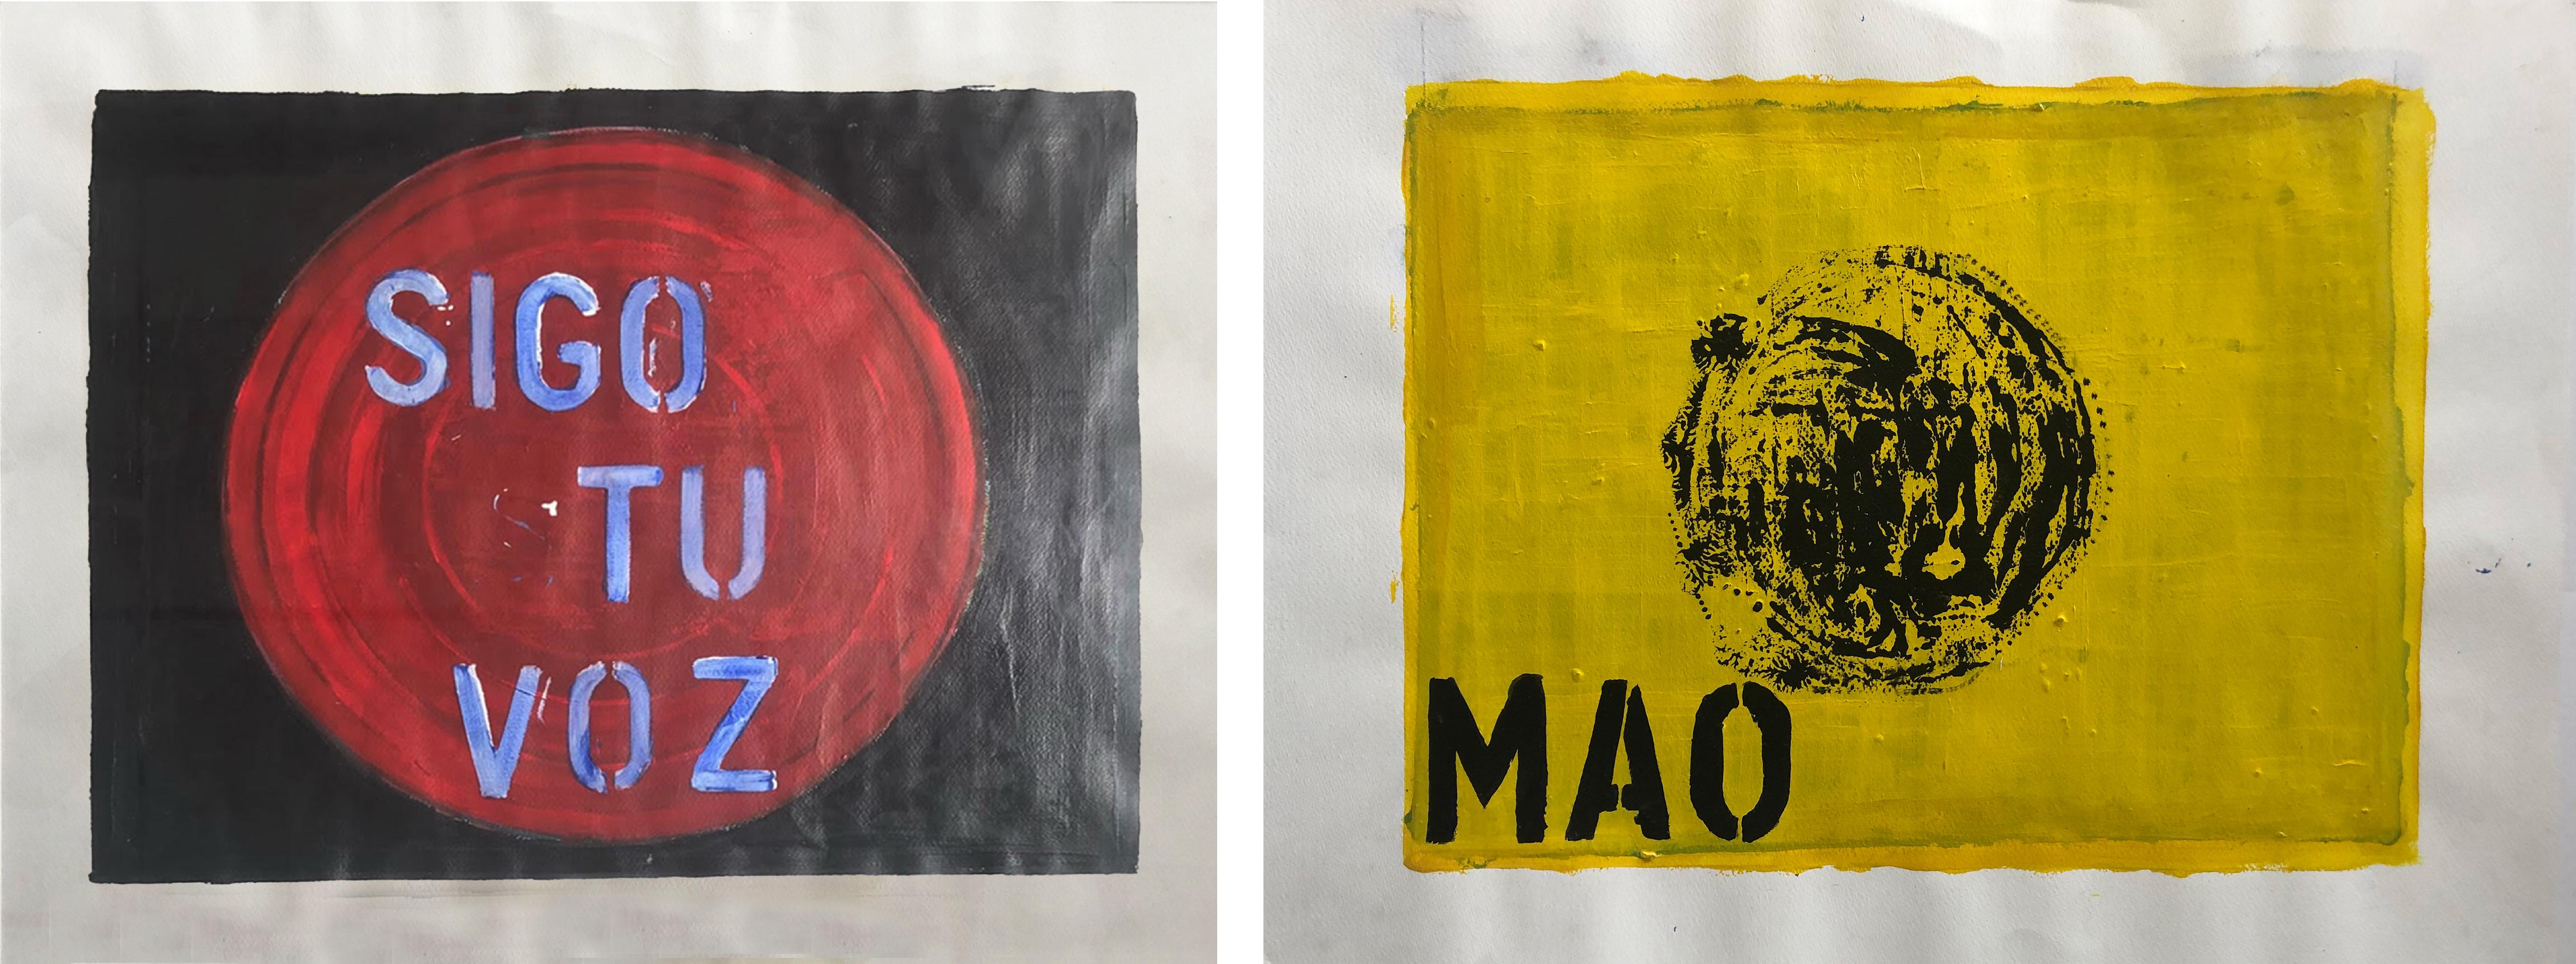 Sergio Bazan Still-Life Painting - Sigo tu voz and Mao. Paintings, Diptych. From the Chaleco Quimico series